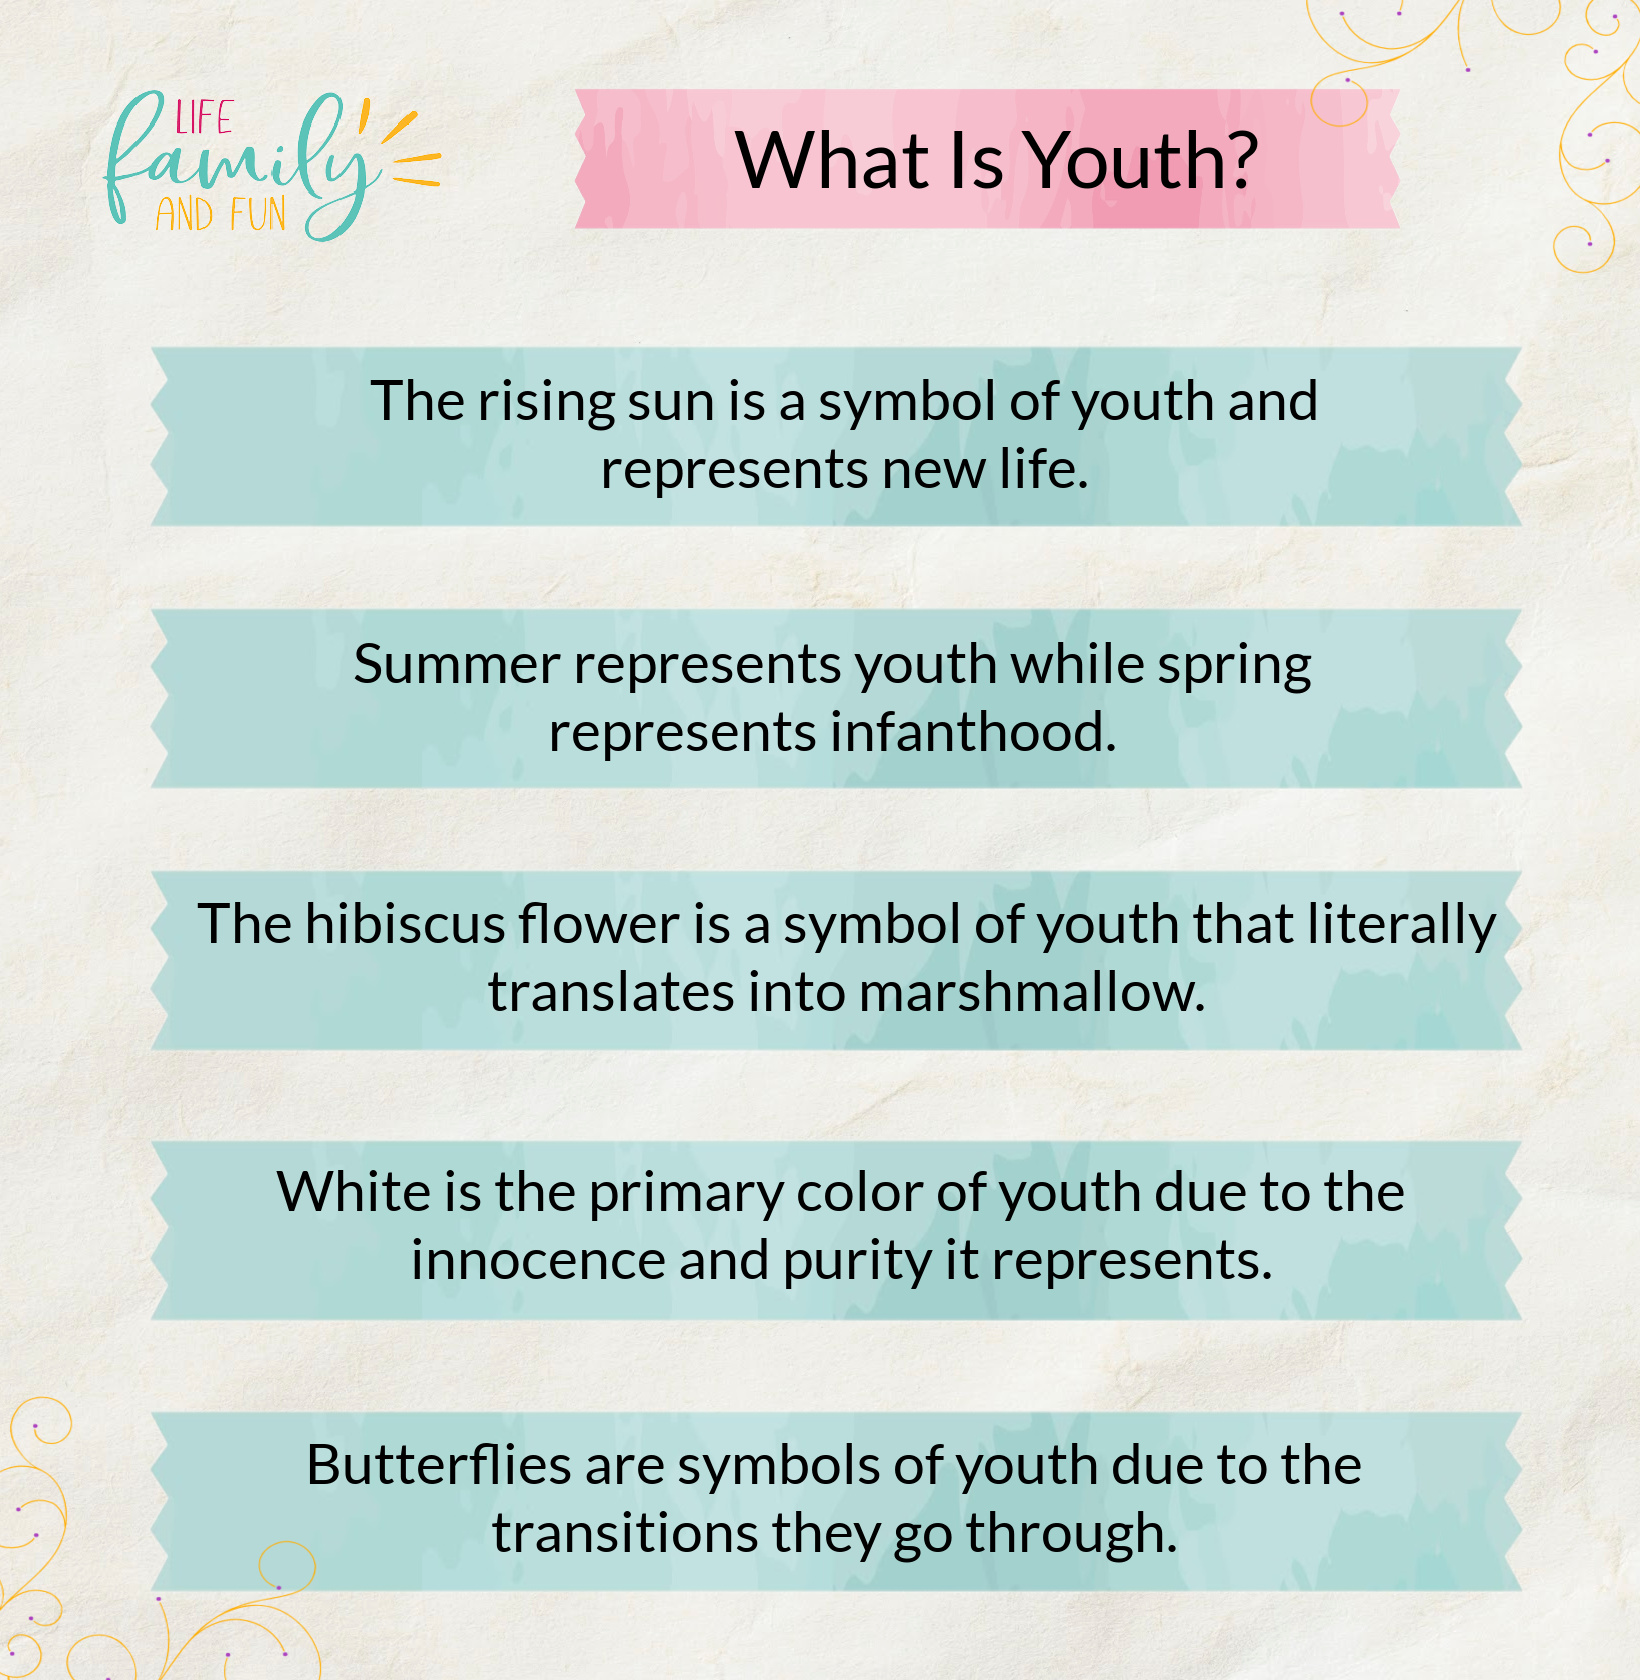 What Is Youth?